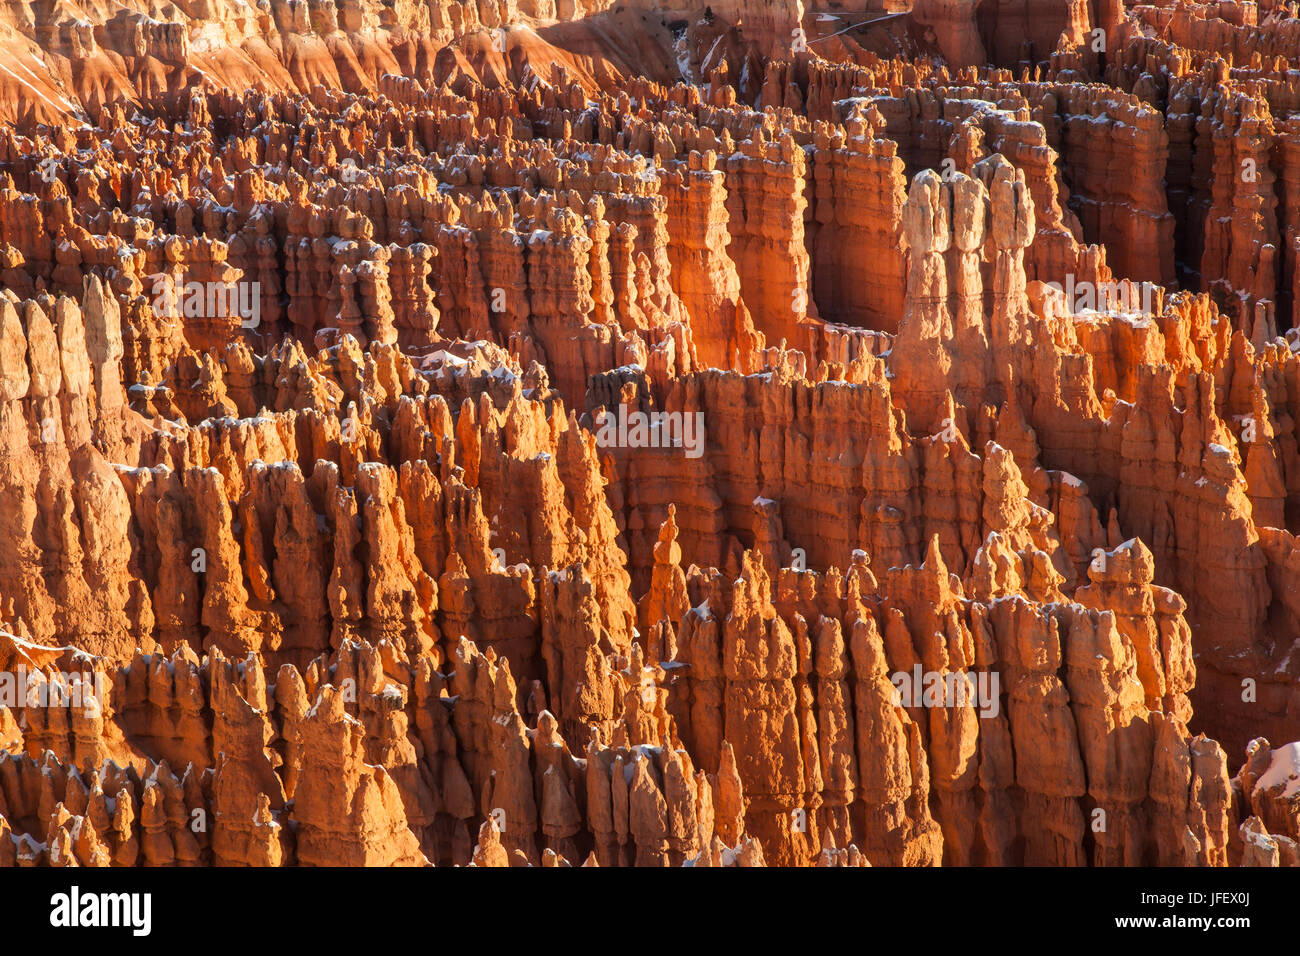 Hoodoos in the Amphitheater of Bryce Canyon National Park, Utah Stock Photo